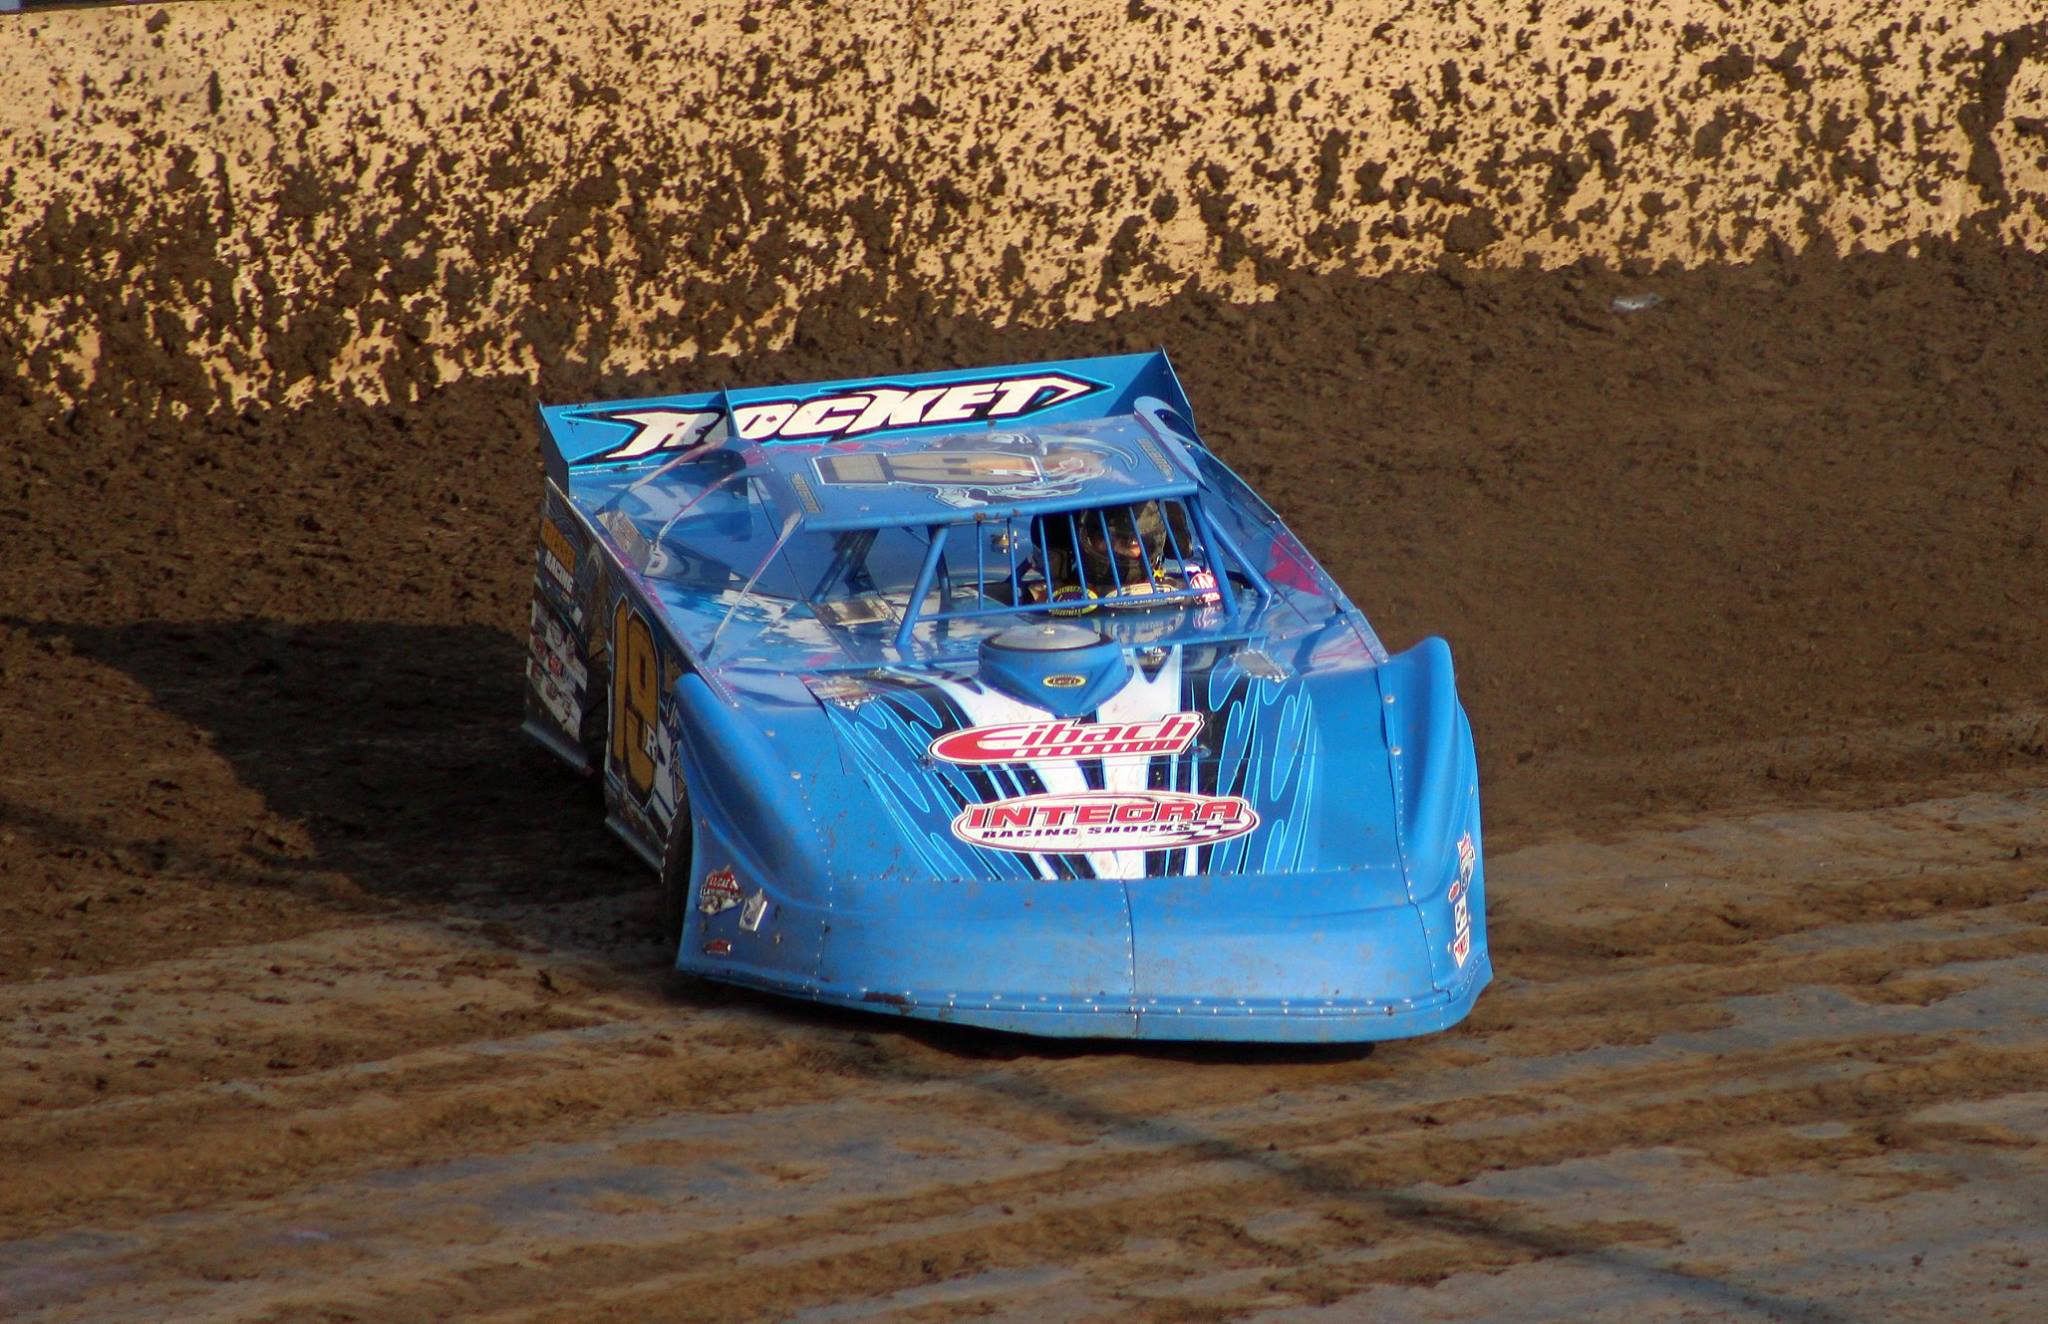 Gustin wows 'em at Tri-City, passes 17 cars en route to seventh-place finish